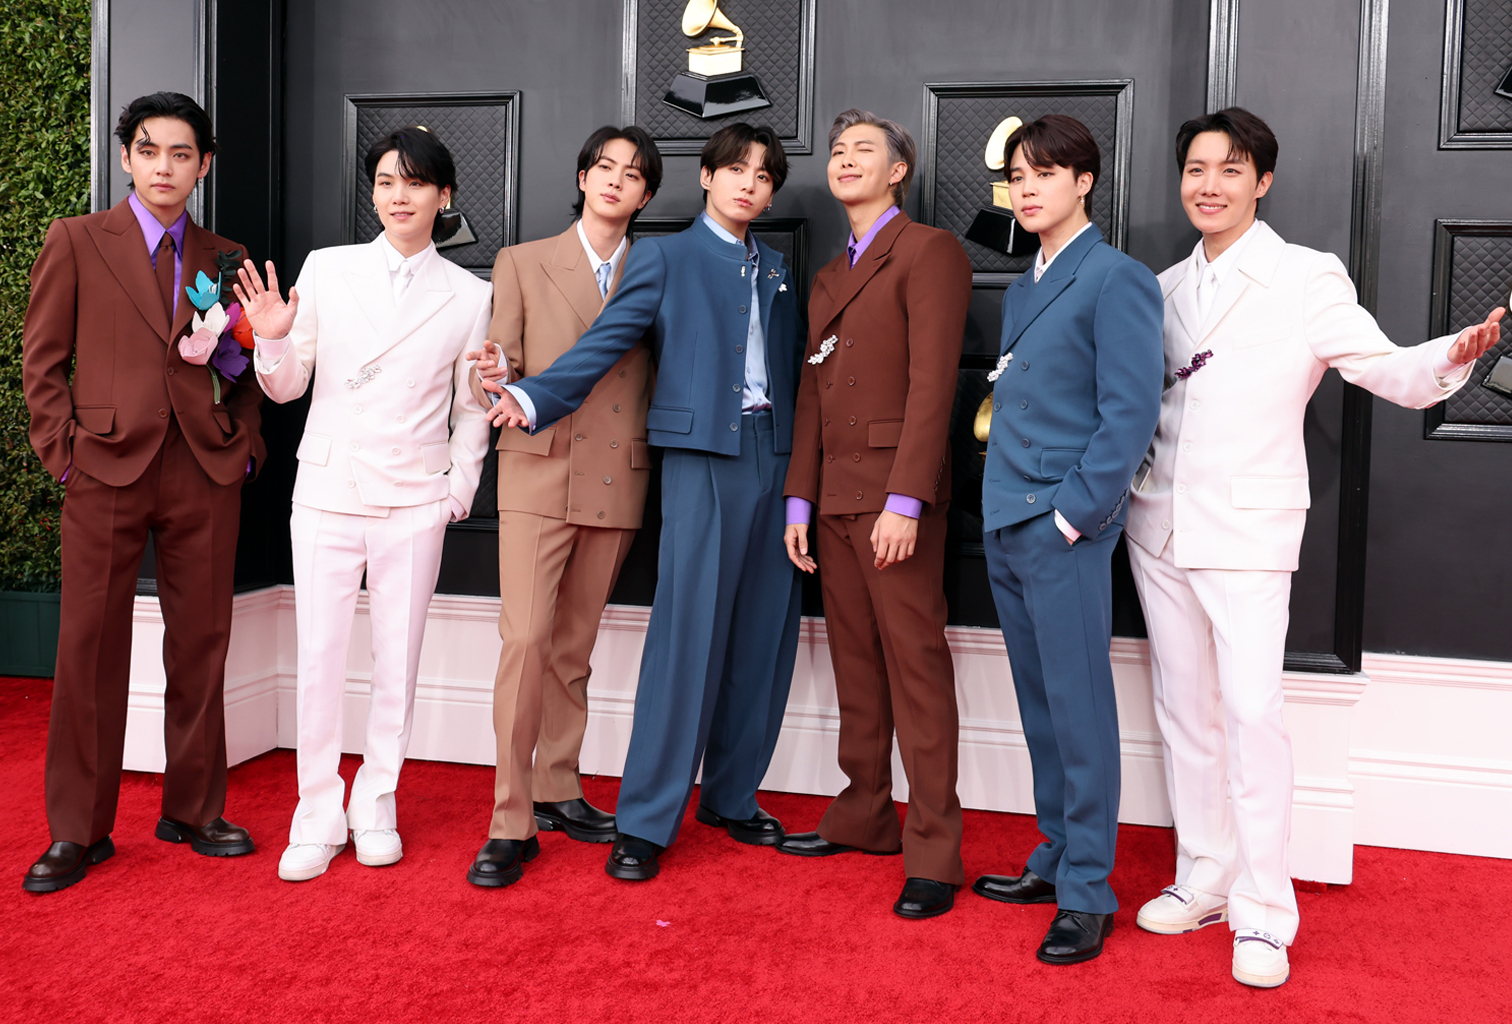 BTS sell out 4-night 'PERMISSION TO DANCE ON STAGE - Las Vegas